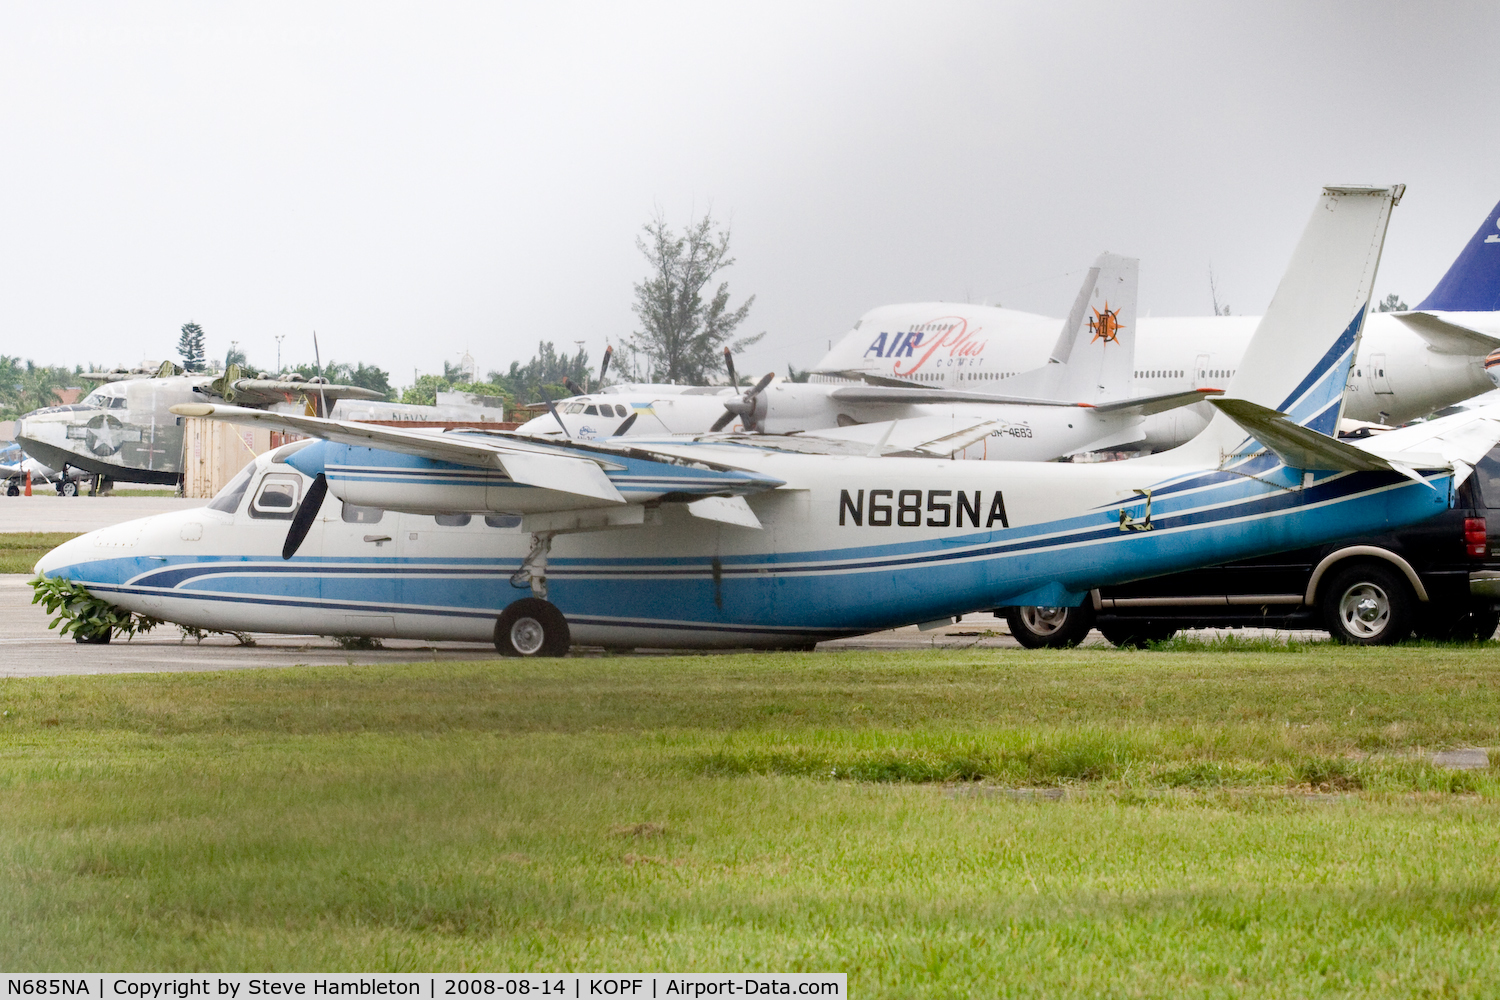 N685NA, 1973 Aero Commander 685 C/N 12028, Seems to have picked up a bit of a tree on its travels